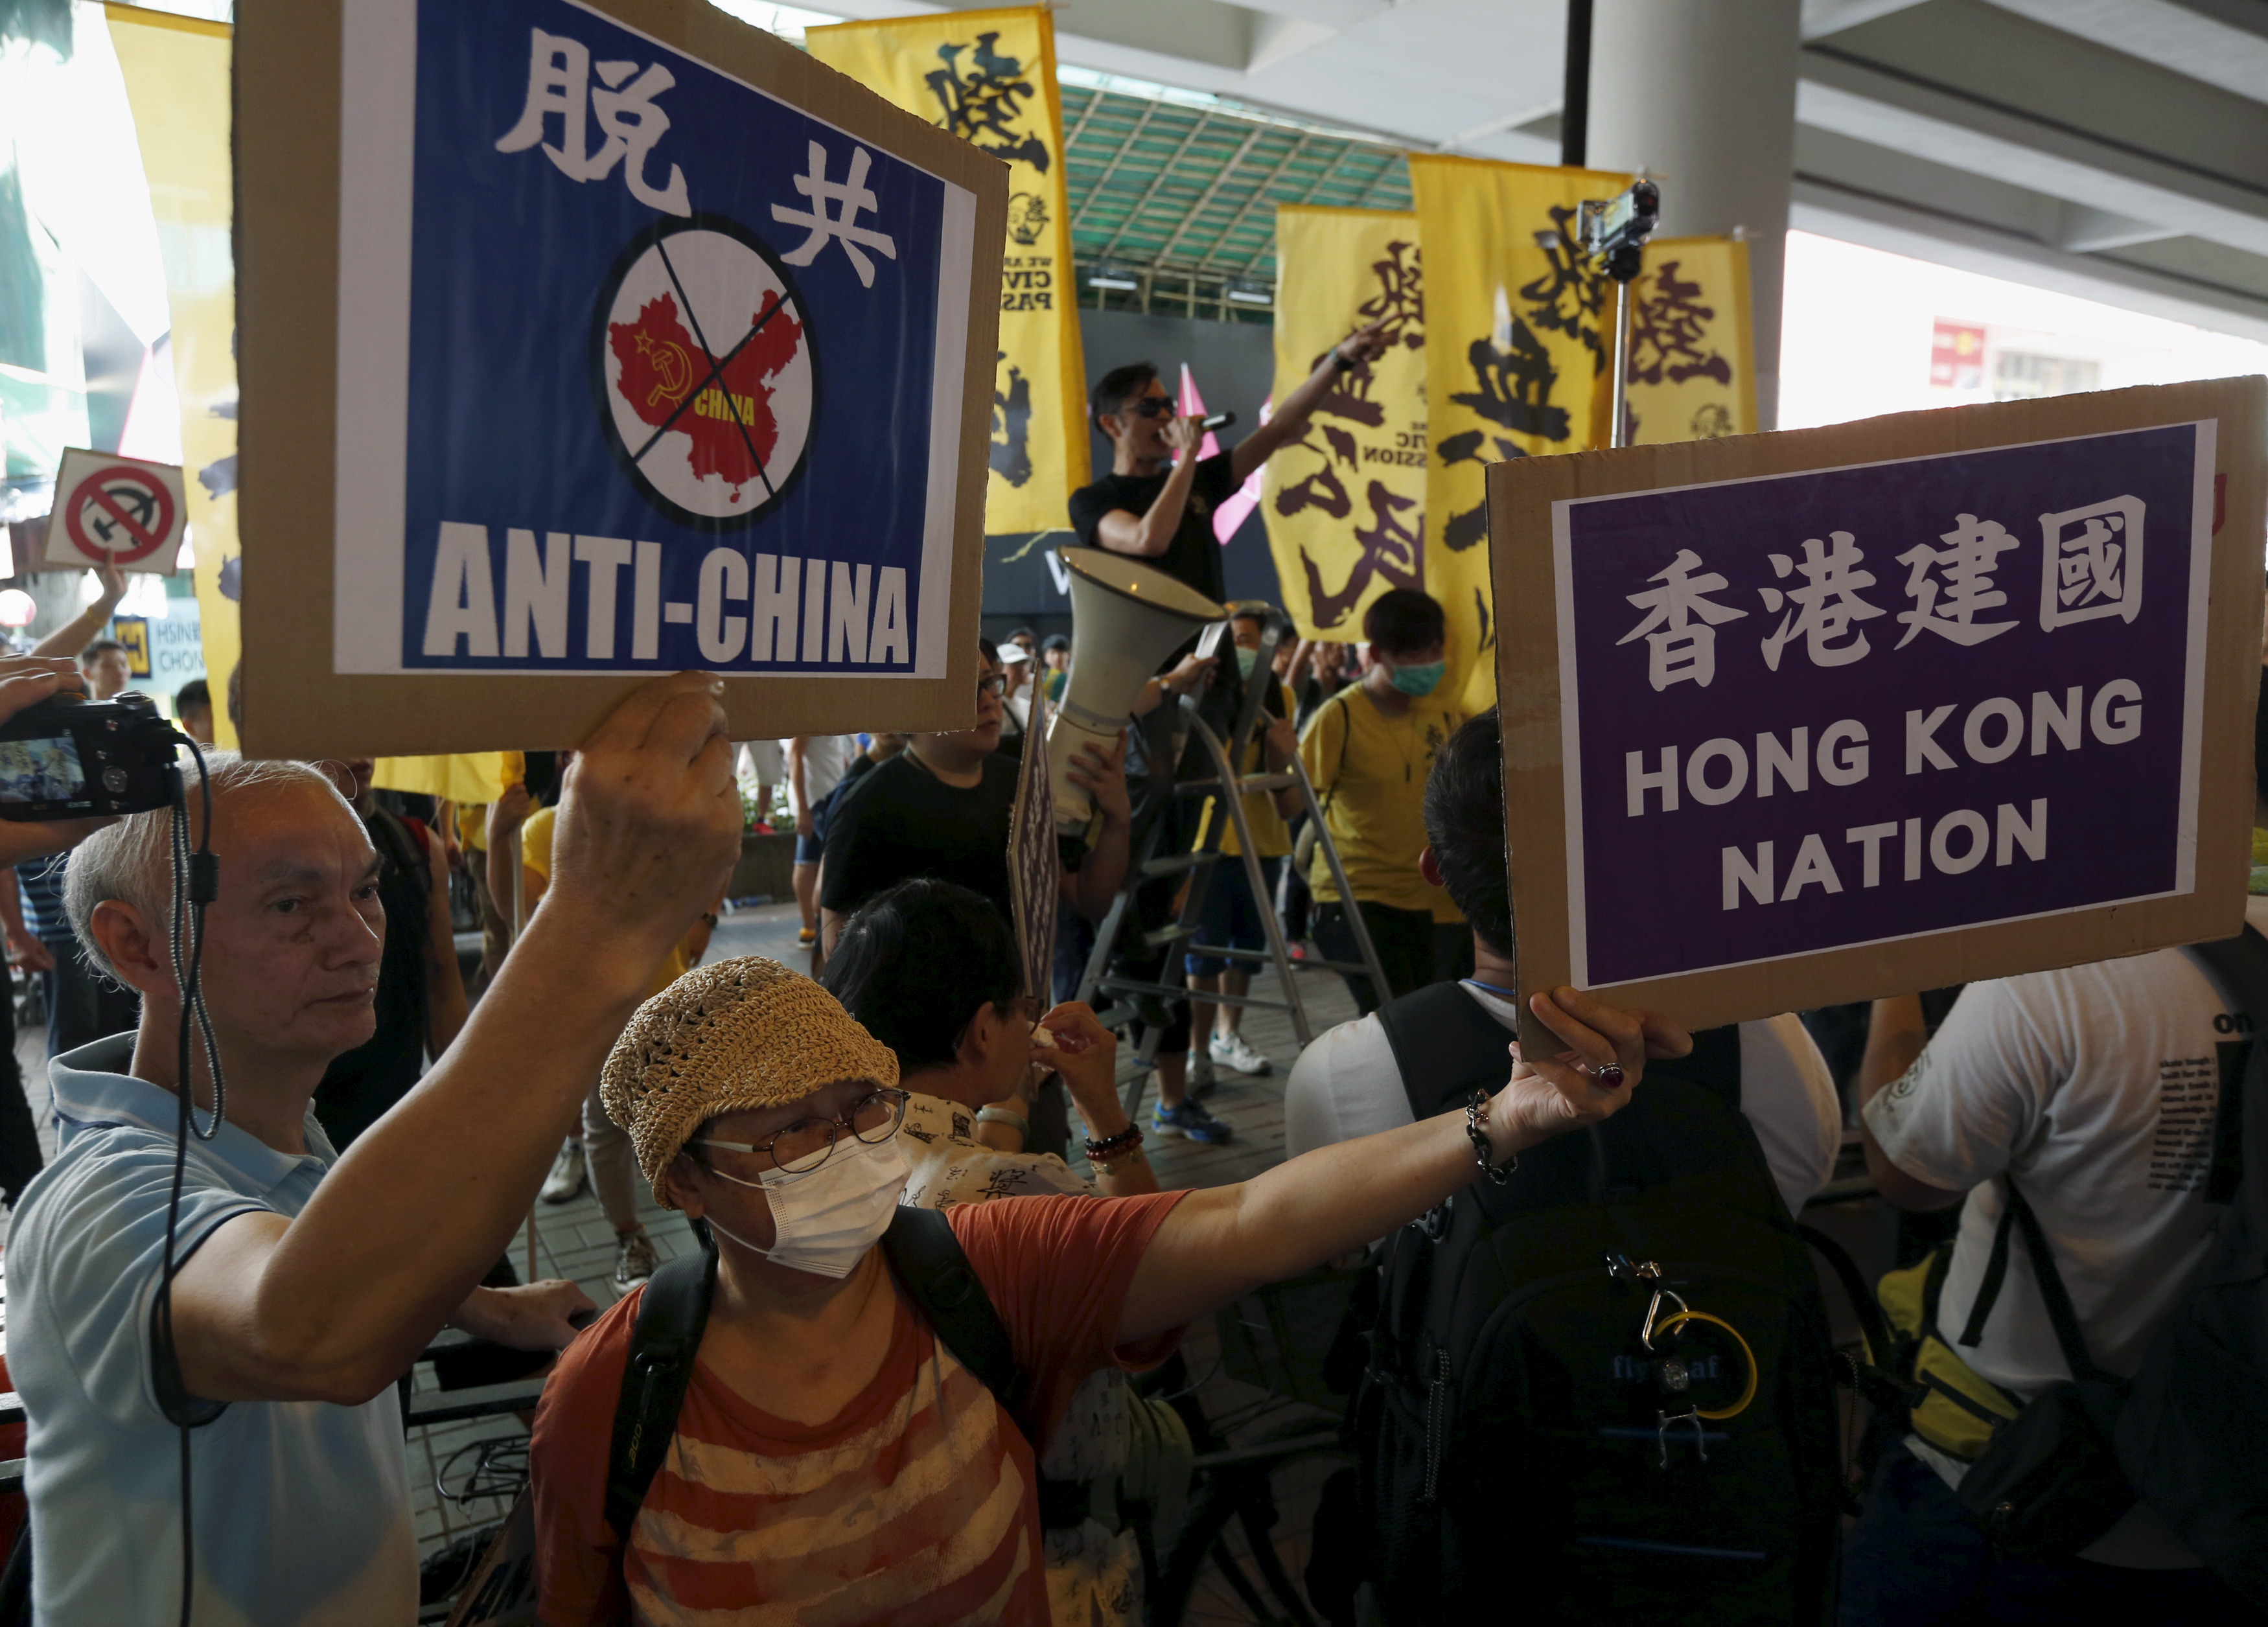 Protesters hold up placards as others shout against pro-China supporters (not in picture) during a demonstration in Hong Kong on July 1, 2015 (Bobby Yip—Reuters)